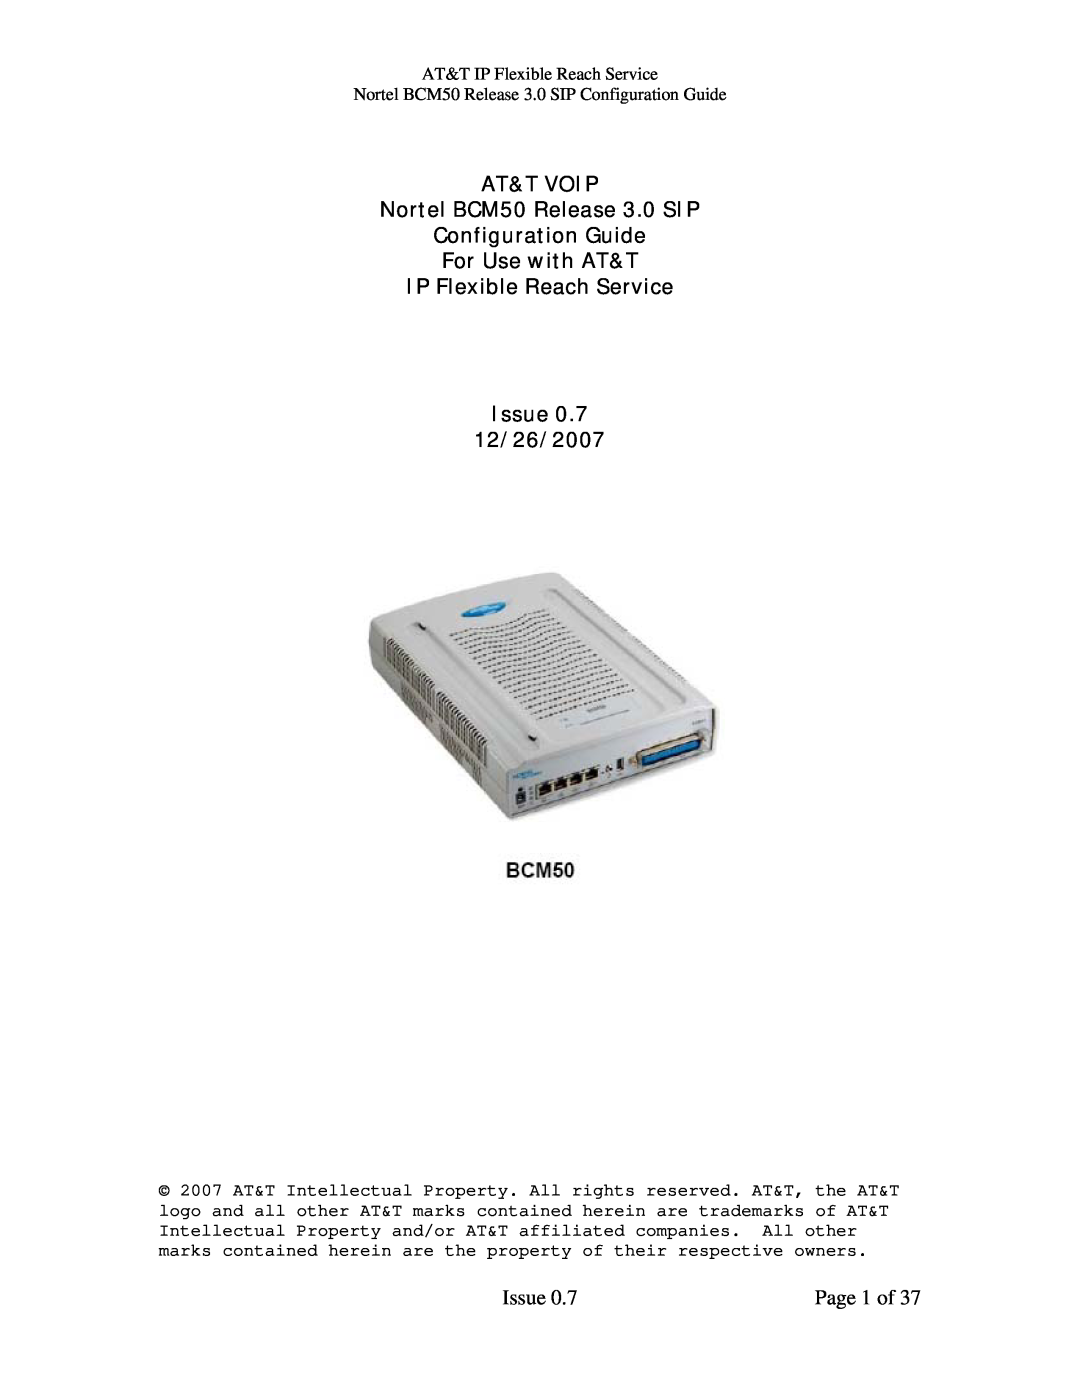 AT&T manual AT&T VOIP Nortel BCM50 Release 3.0 SIP Configuration Guide, Issue, Page 1 of 